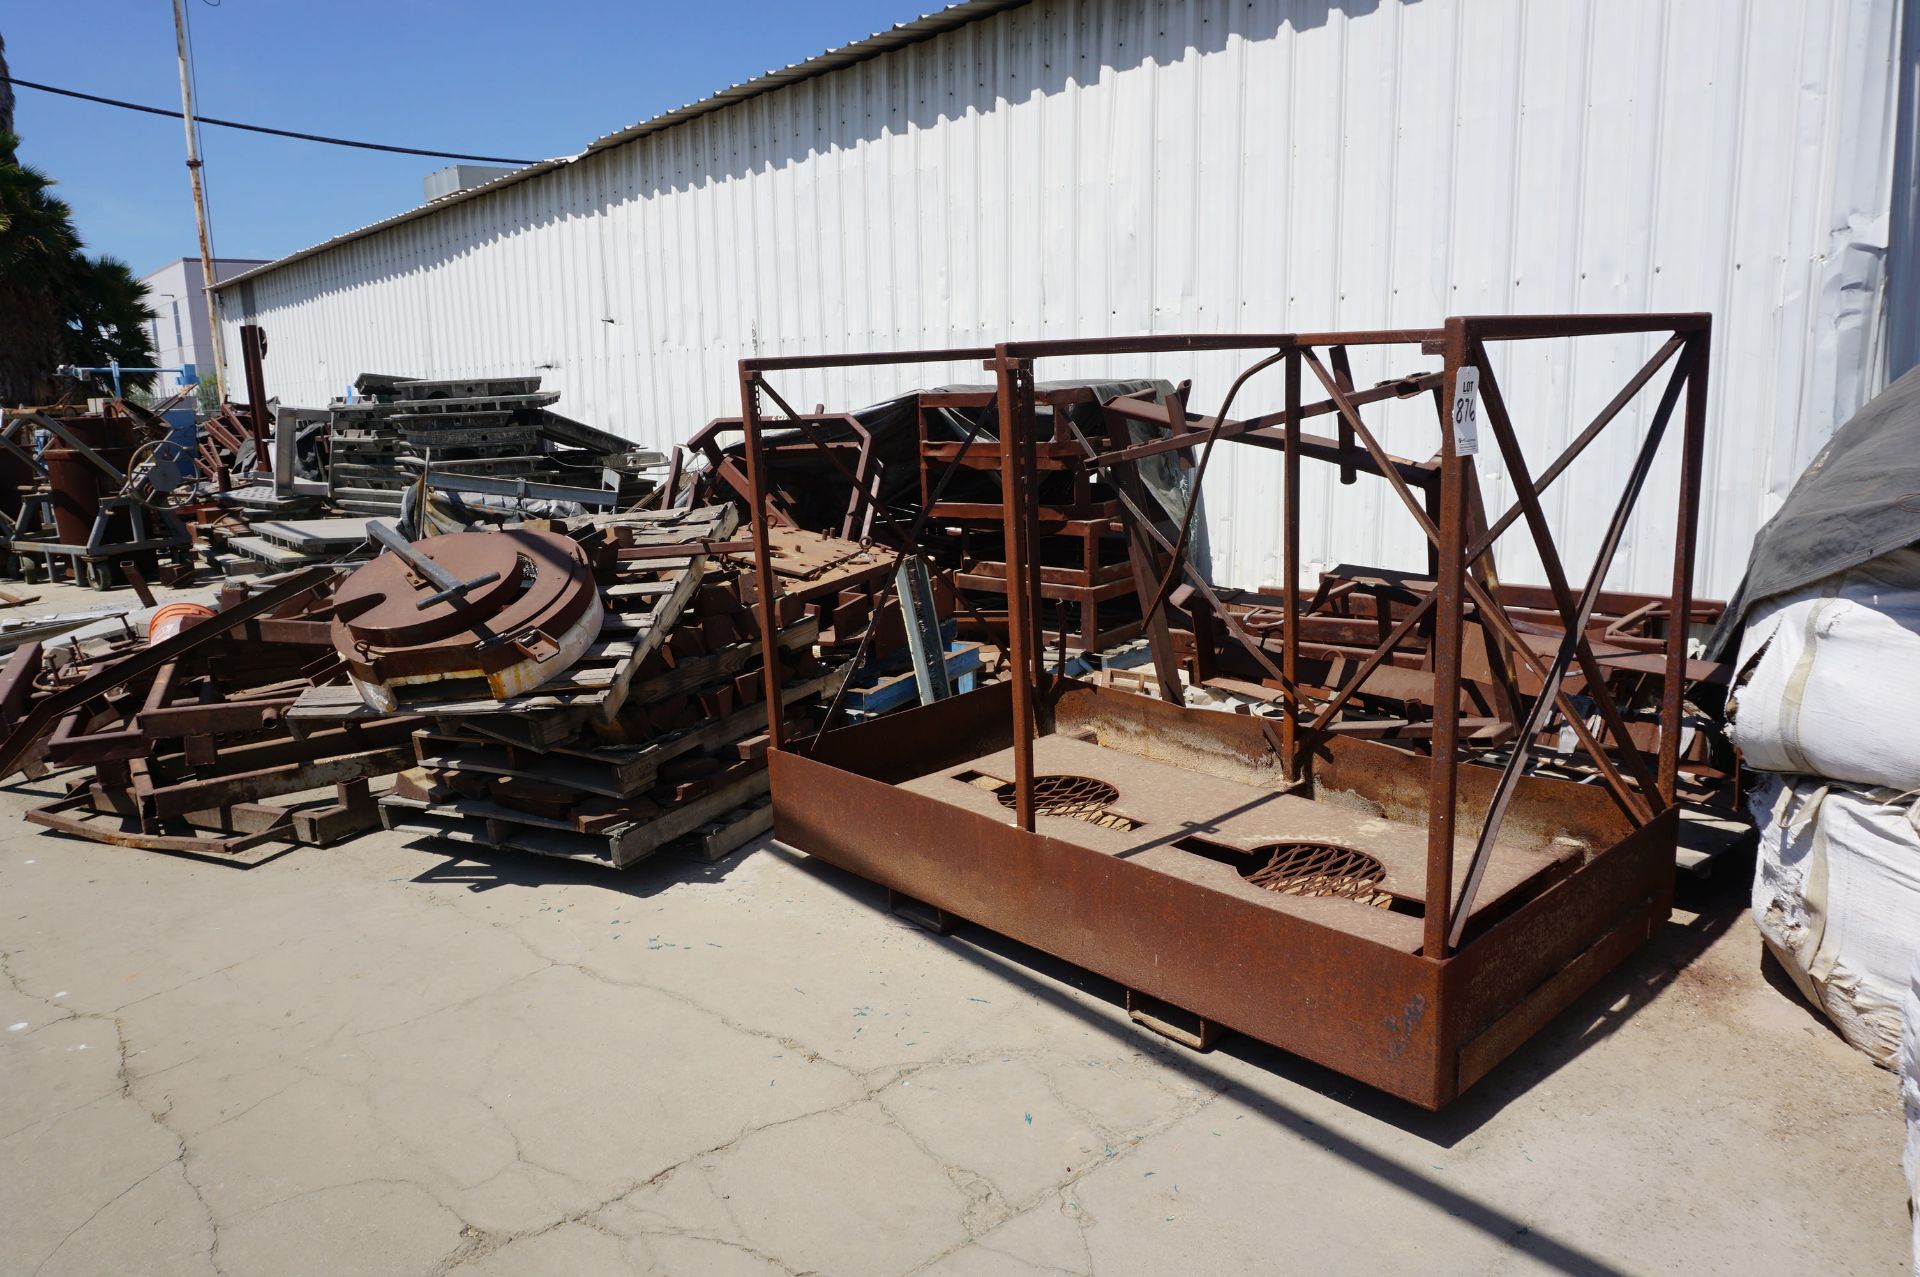 LARGE QUANTITY OF STEEL AND ALUMINUM SCRAP TO INCLUDE BUT NOT LIMITED TO: STEEL RACKS, STEEL